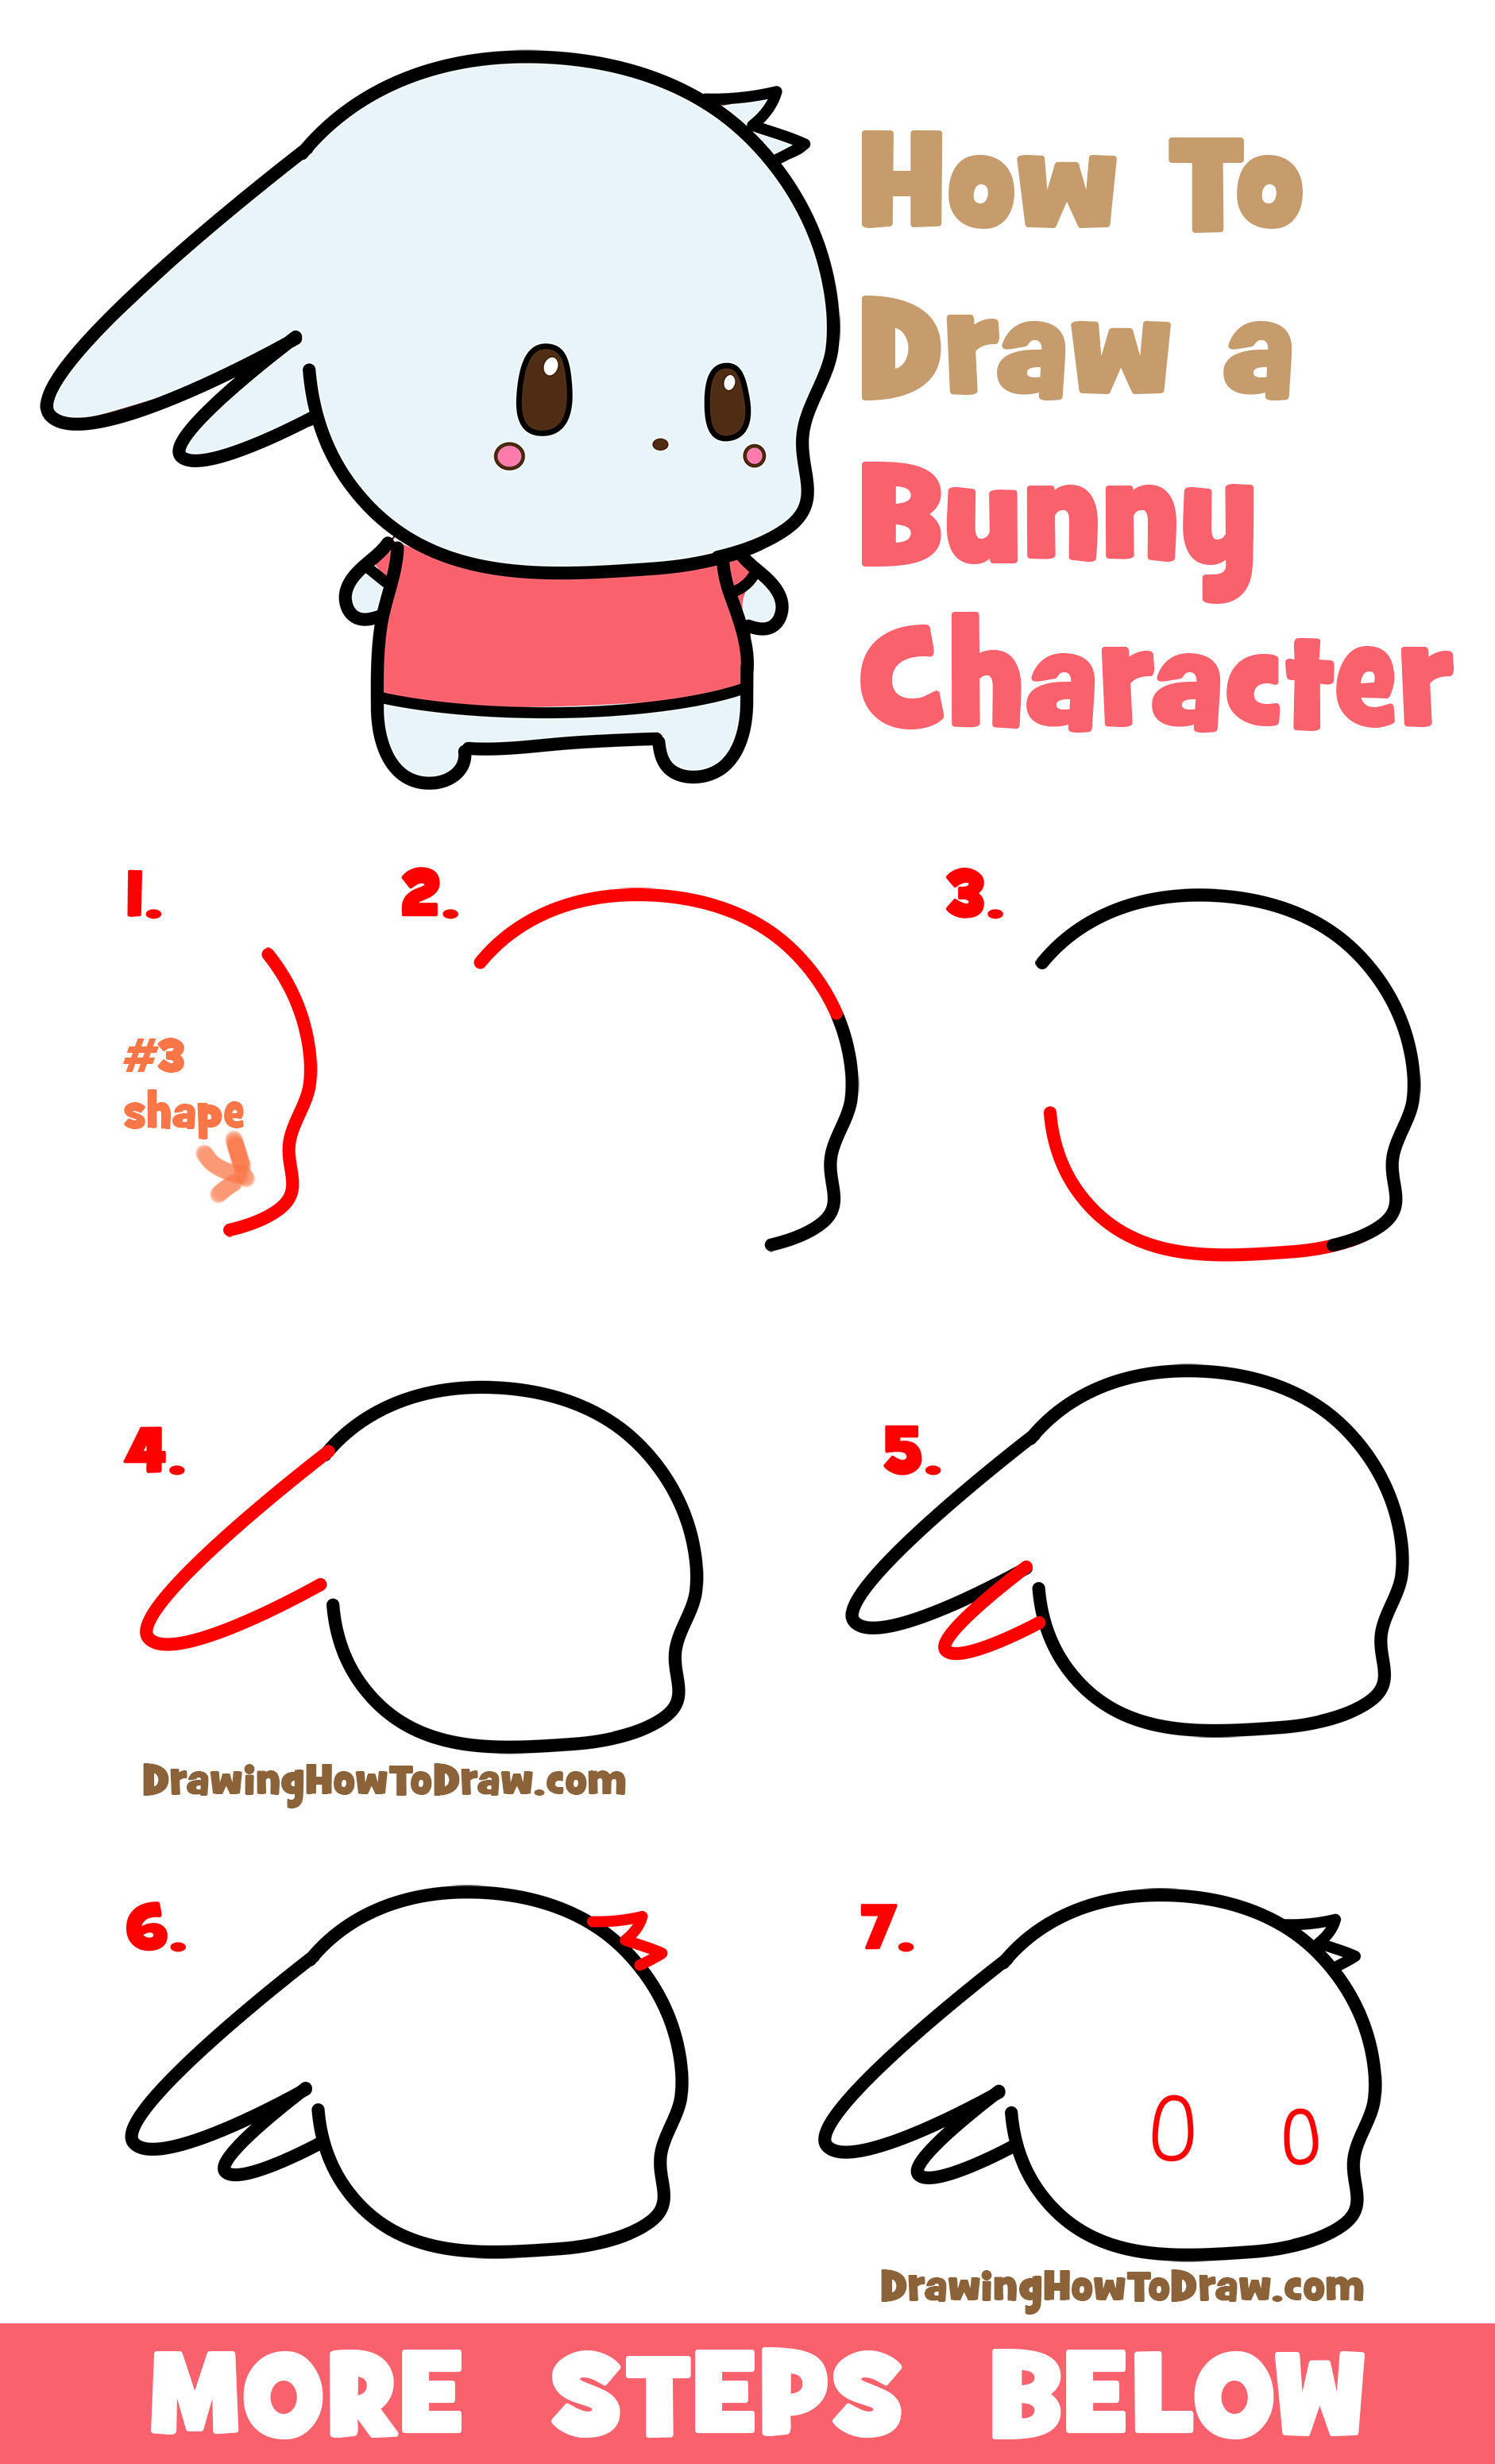 How to Draw an Easter Bunny: Easy Steps for Primary Grades